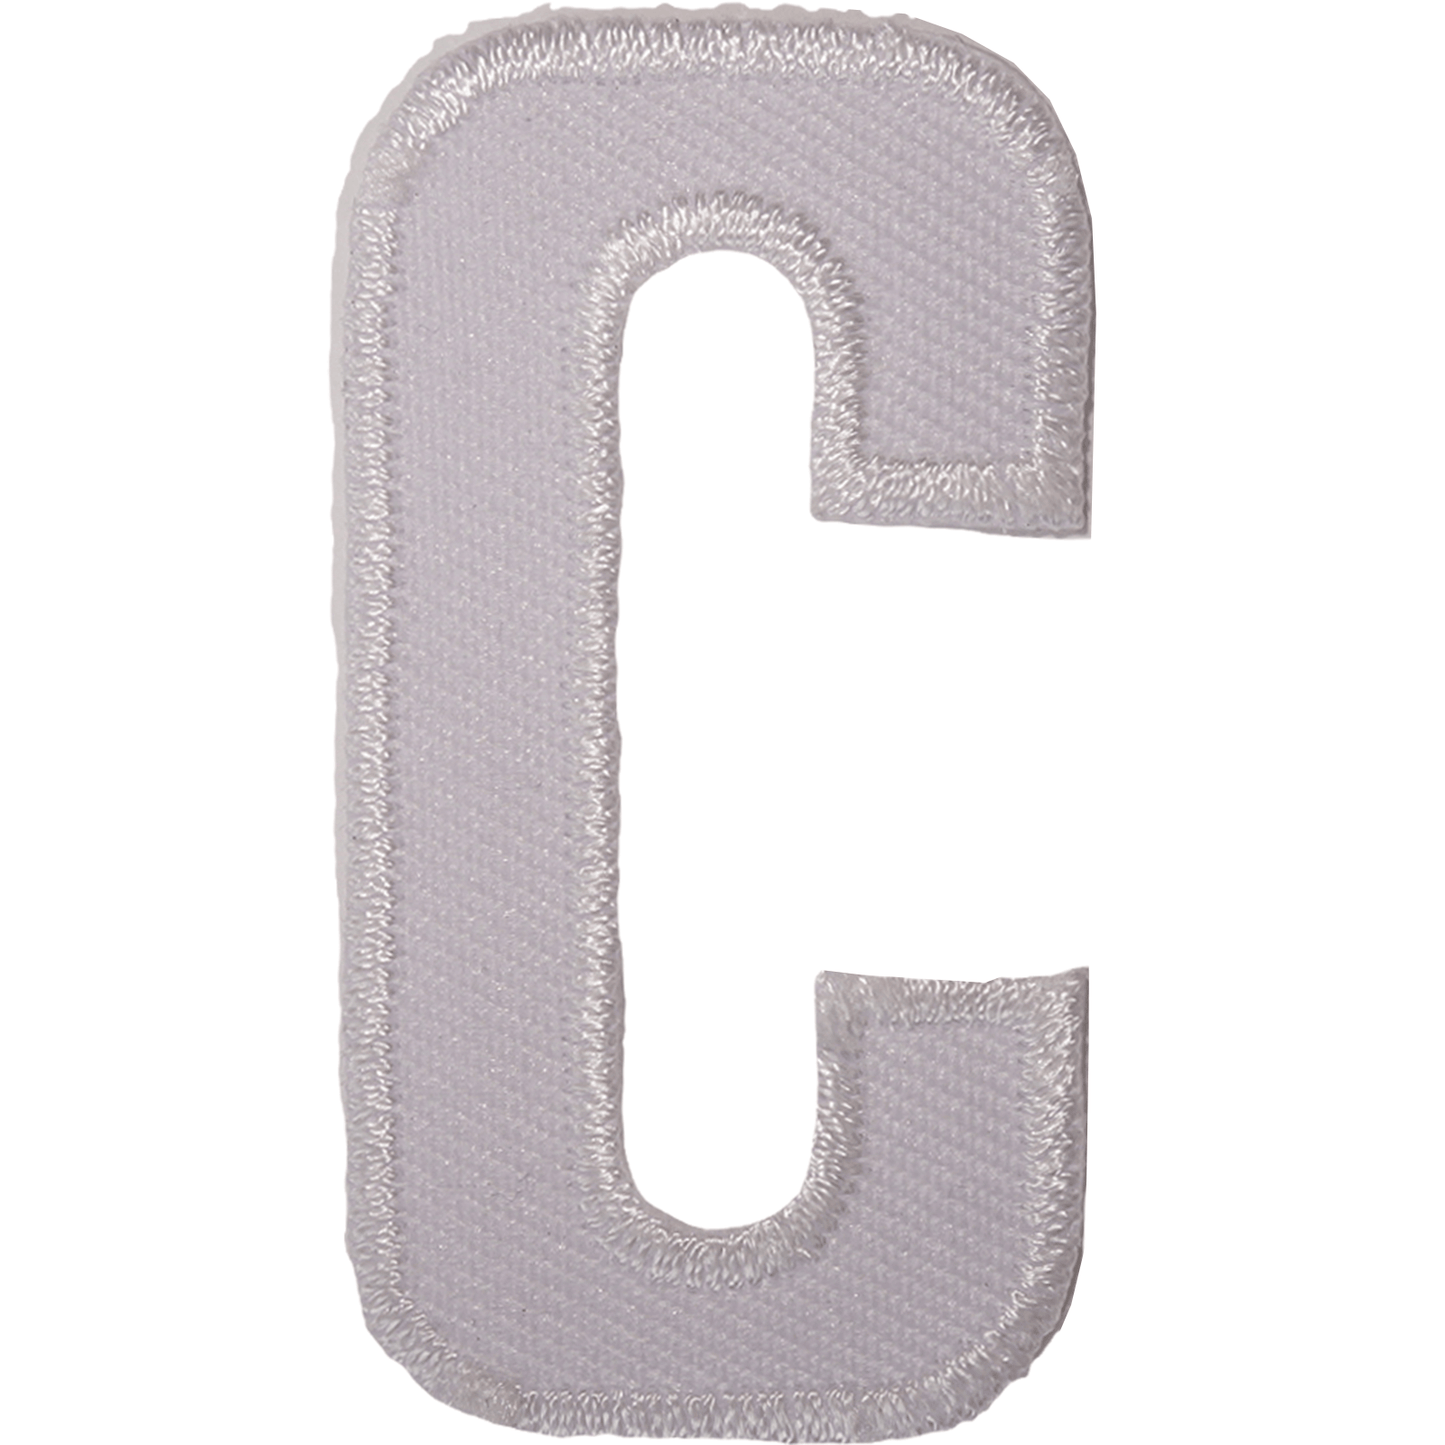 Letter C White Letter Number Iron Sew On Patches Badges Name Letters Numbers Badge Patch